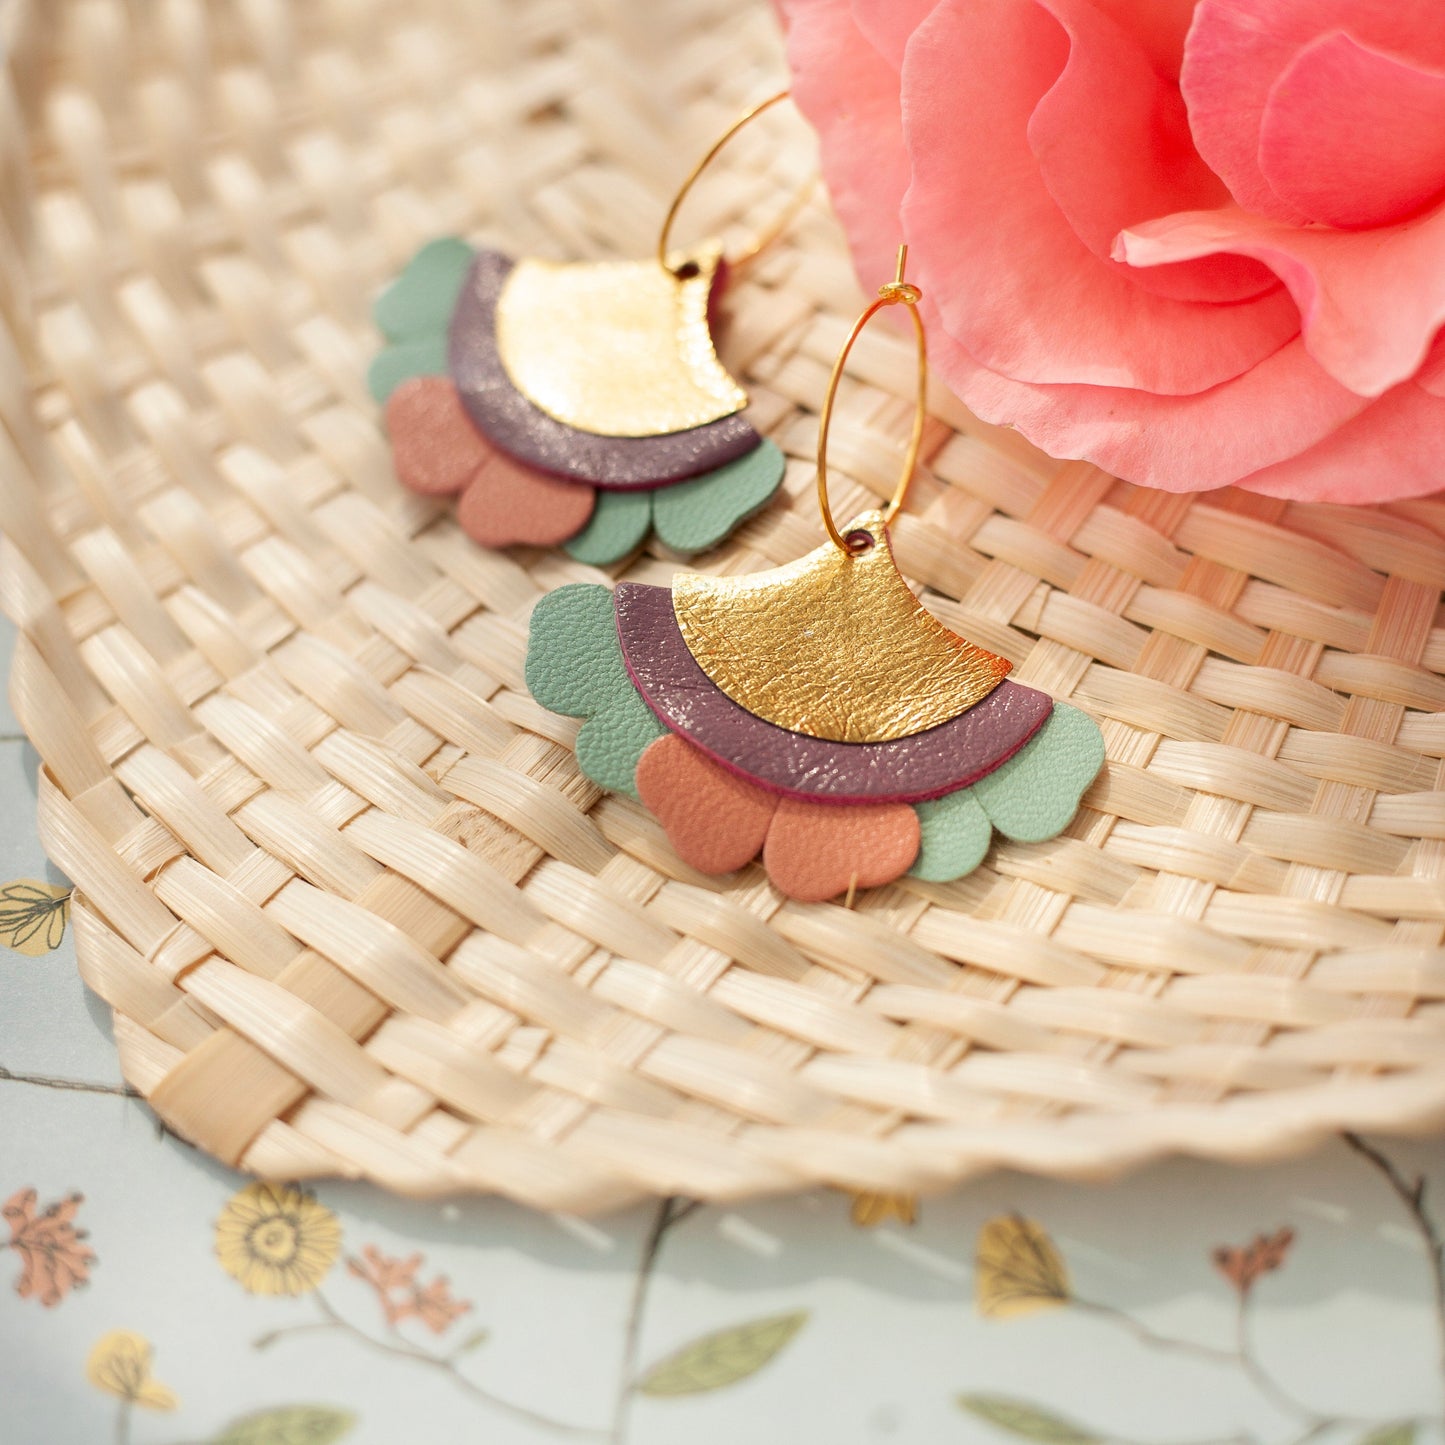 Fan earrings in pink, turquoise, mauve and gold leather